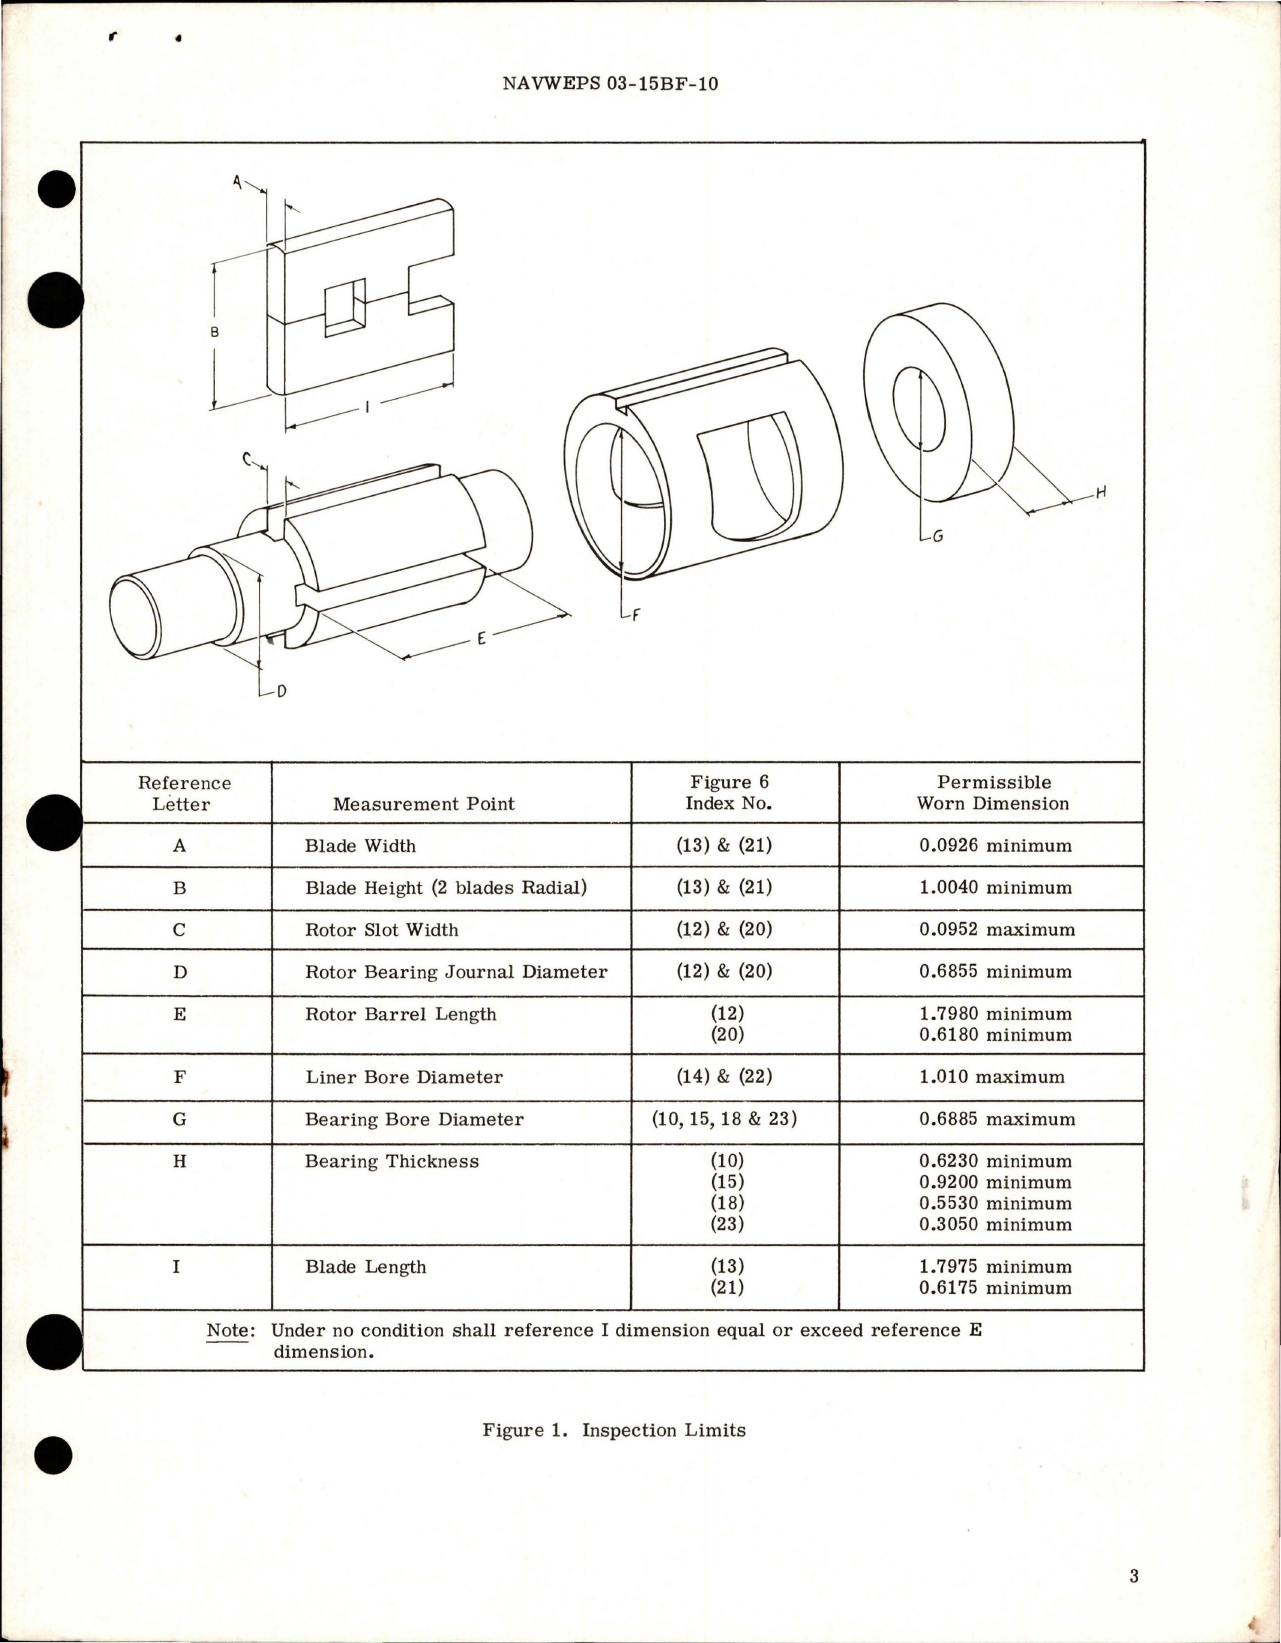 Sample page 5 from AirCorps Library document: Overhaul Instructions with Parts for Main Lube Pump - LSI Model RR16730A and RR16730D 